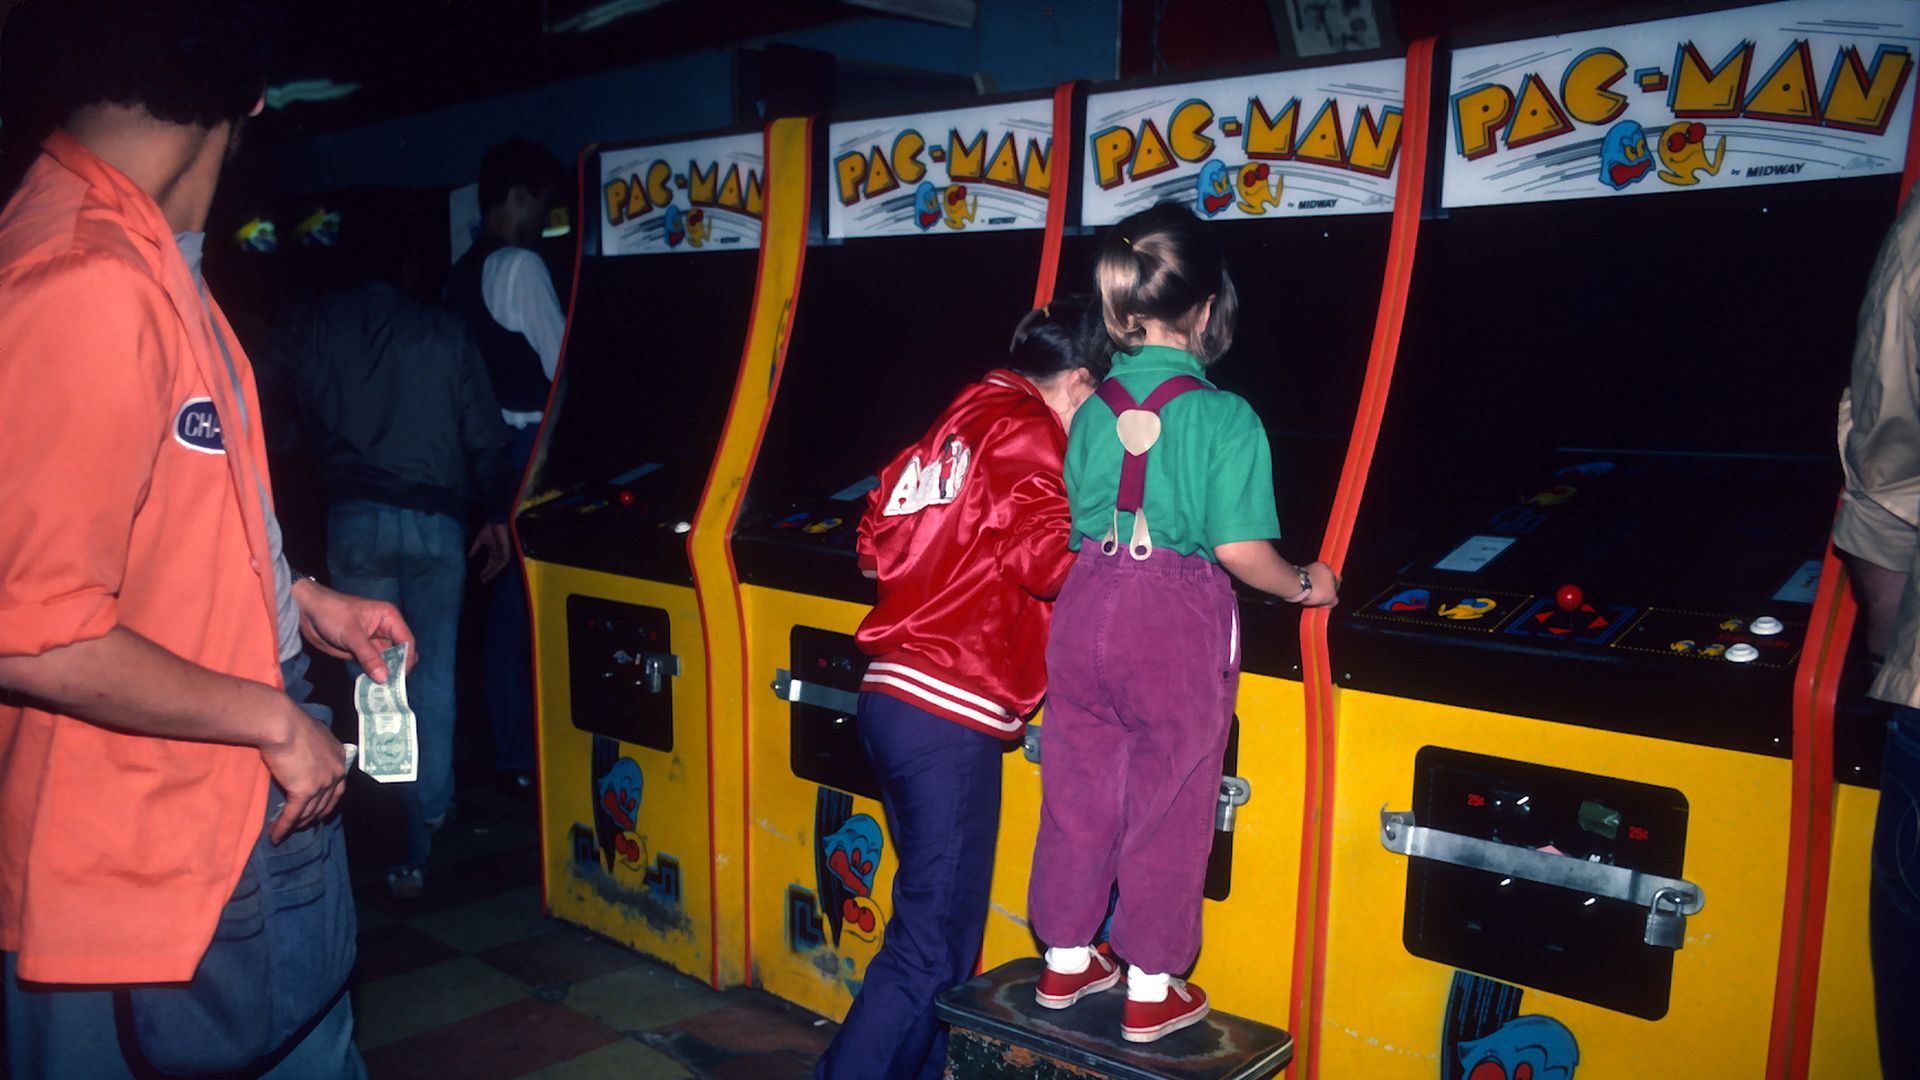 Two young children playing Pac-Man in an arcade. One stands on a stool to see the screen.